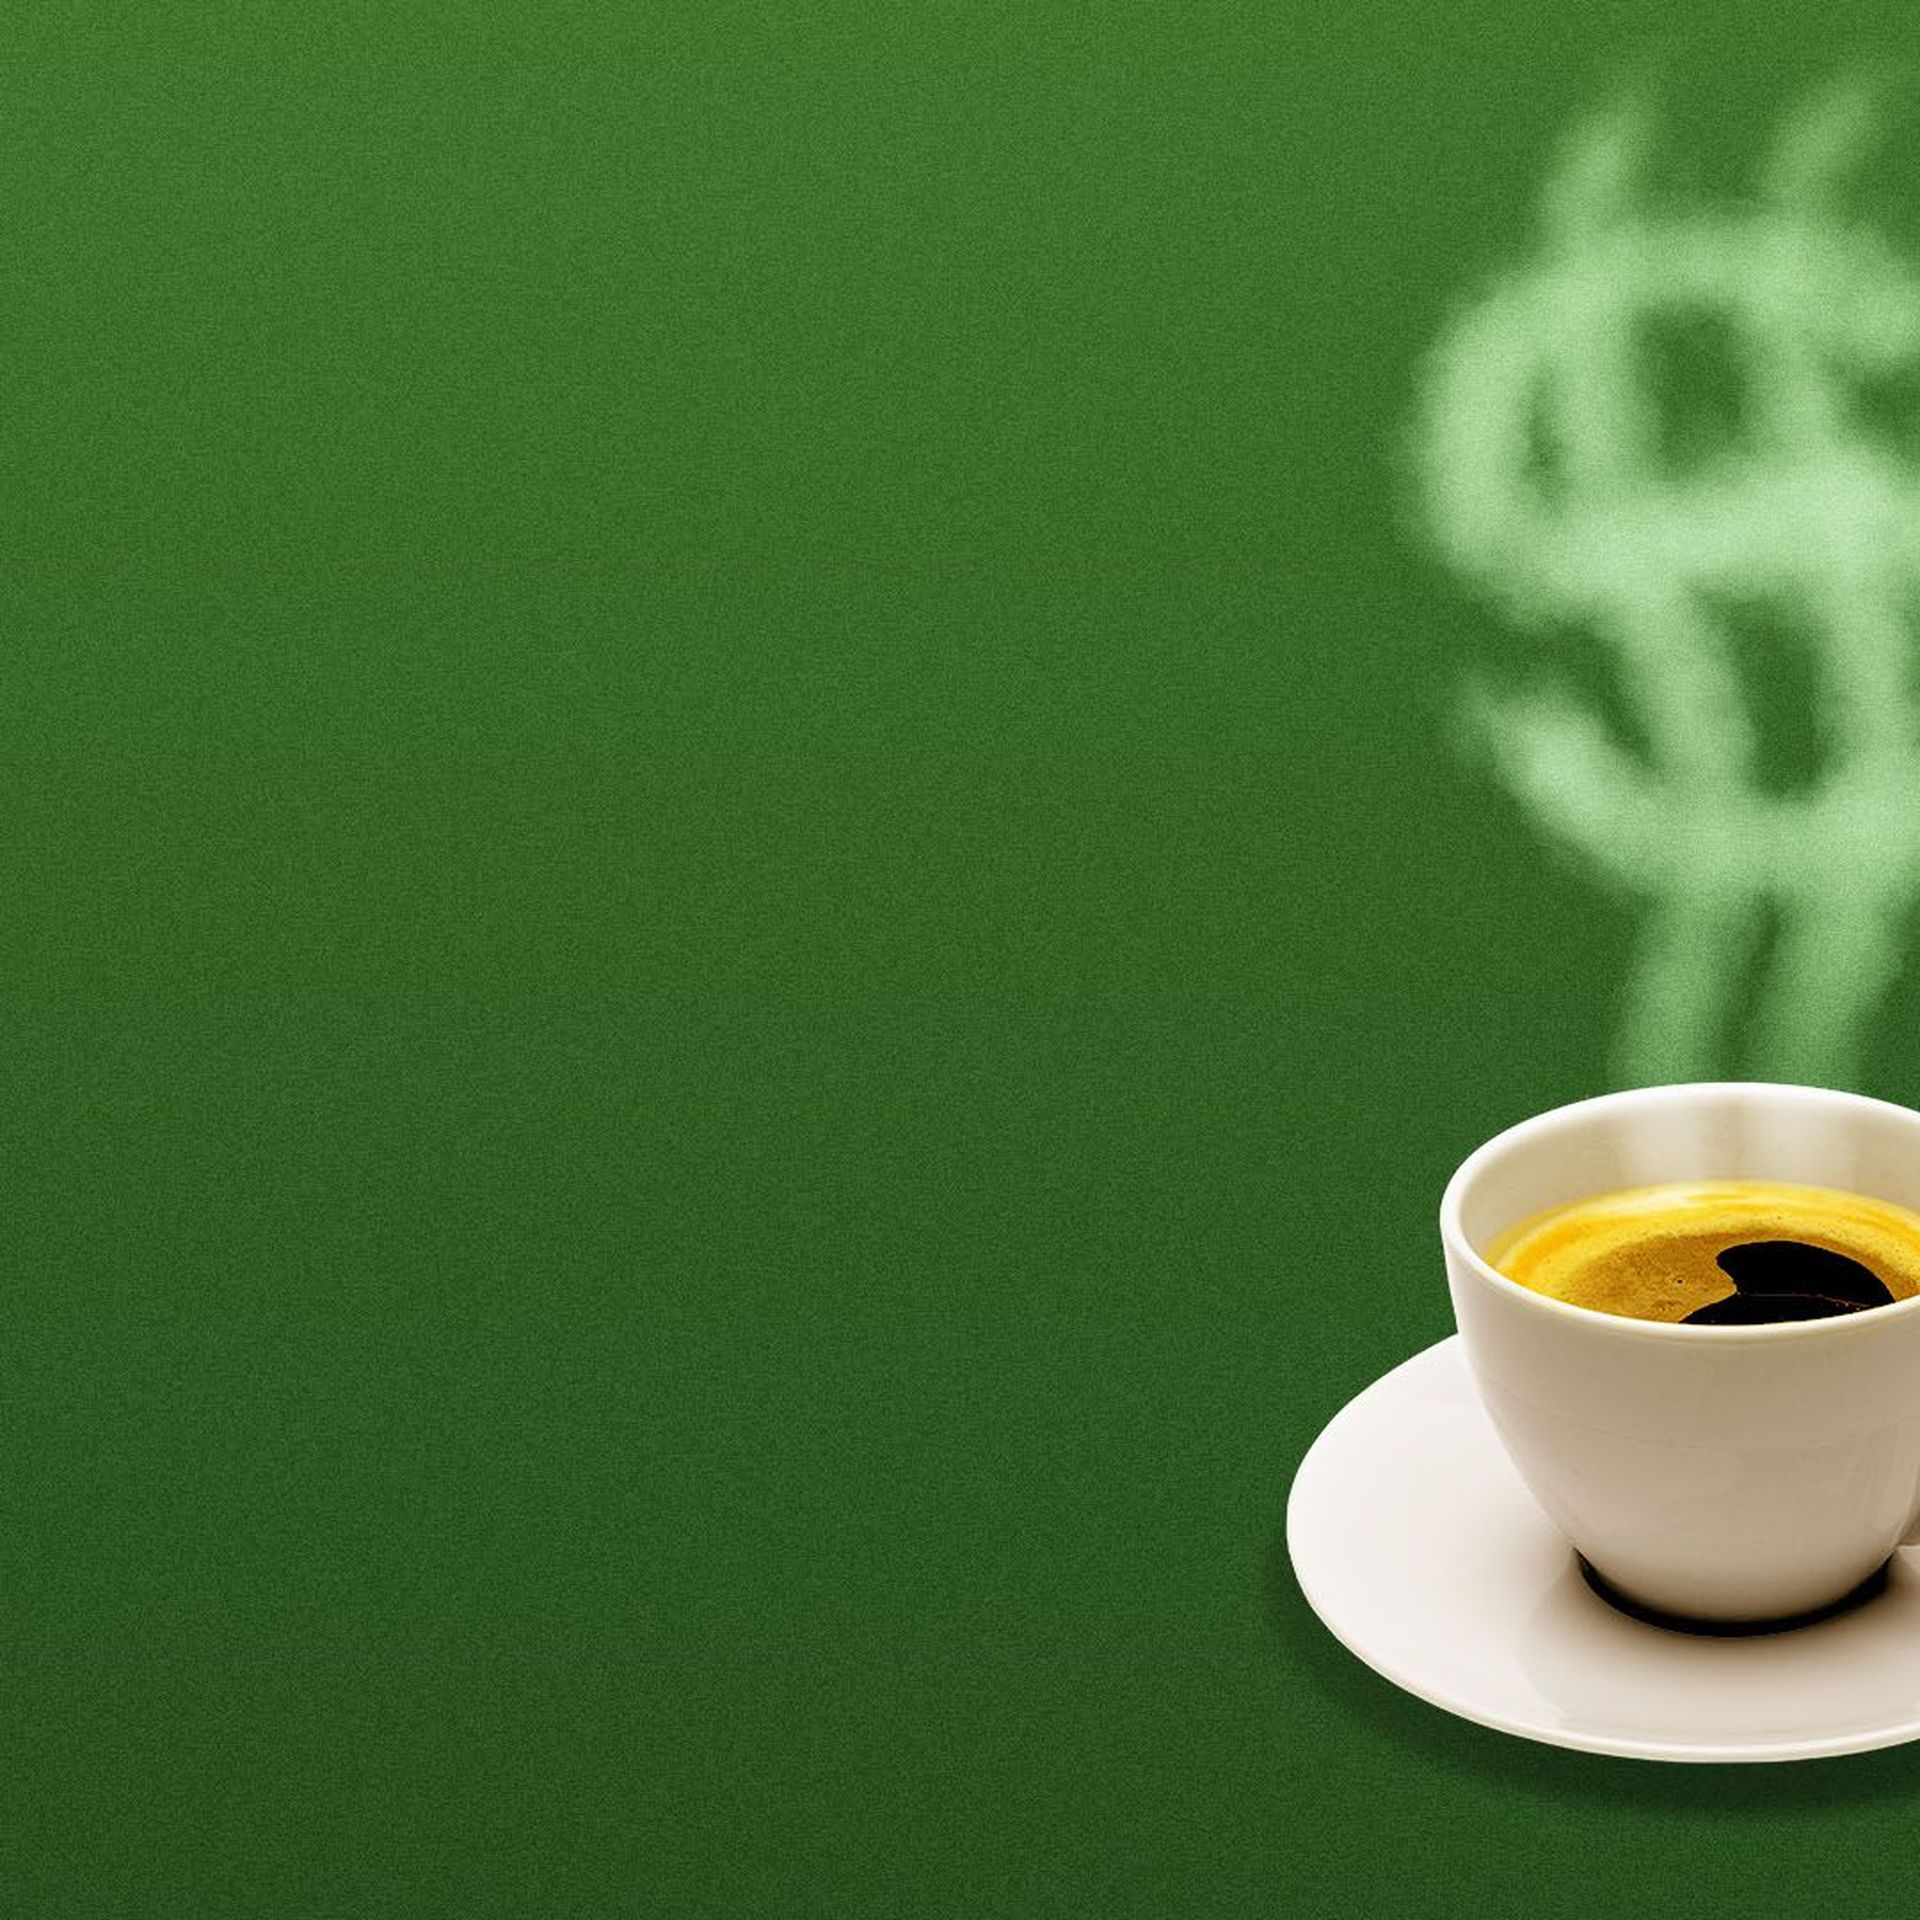 Illustration of a coffee cup with steam in the shape of a dollar sign.